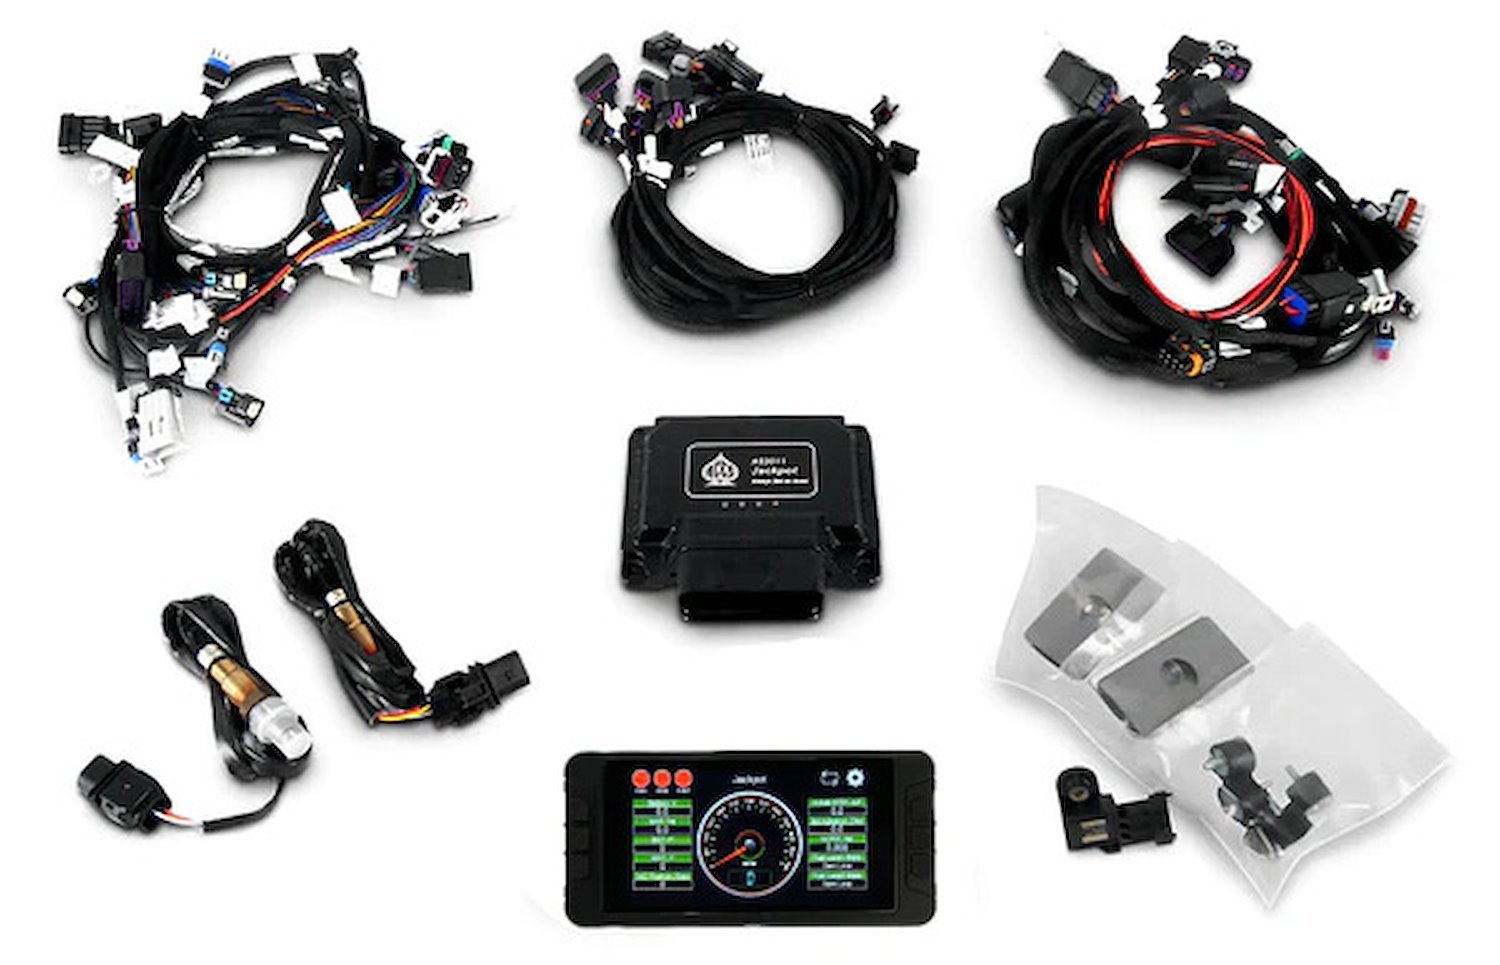 AS2011-1 Jackpot Plug-and-Play Engine Control for GM LS,